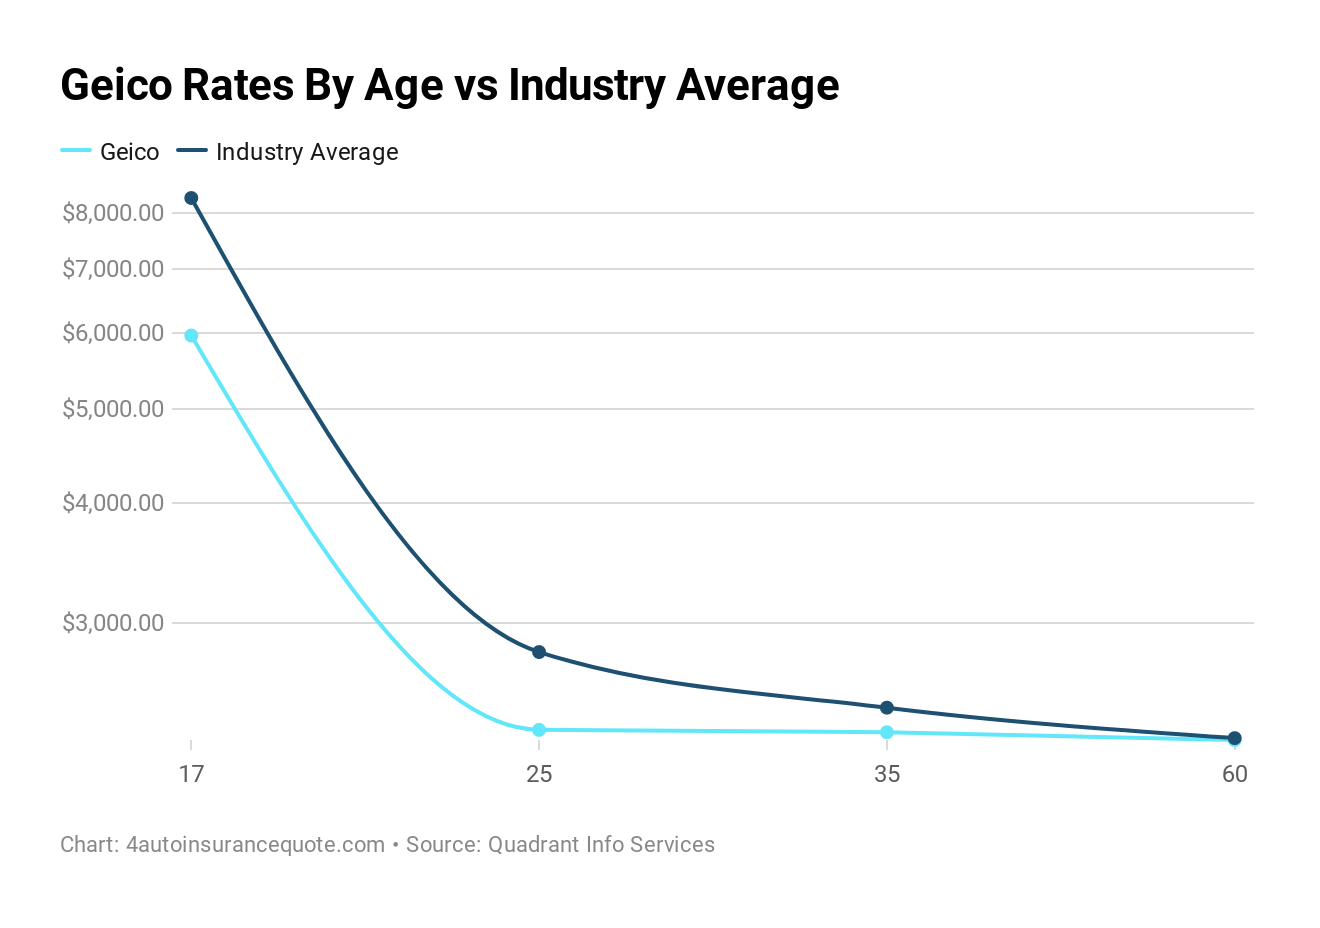 Geico Rates By Age vs Industry Average